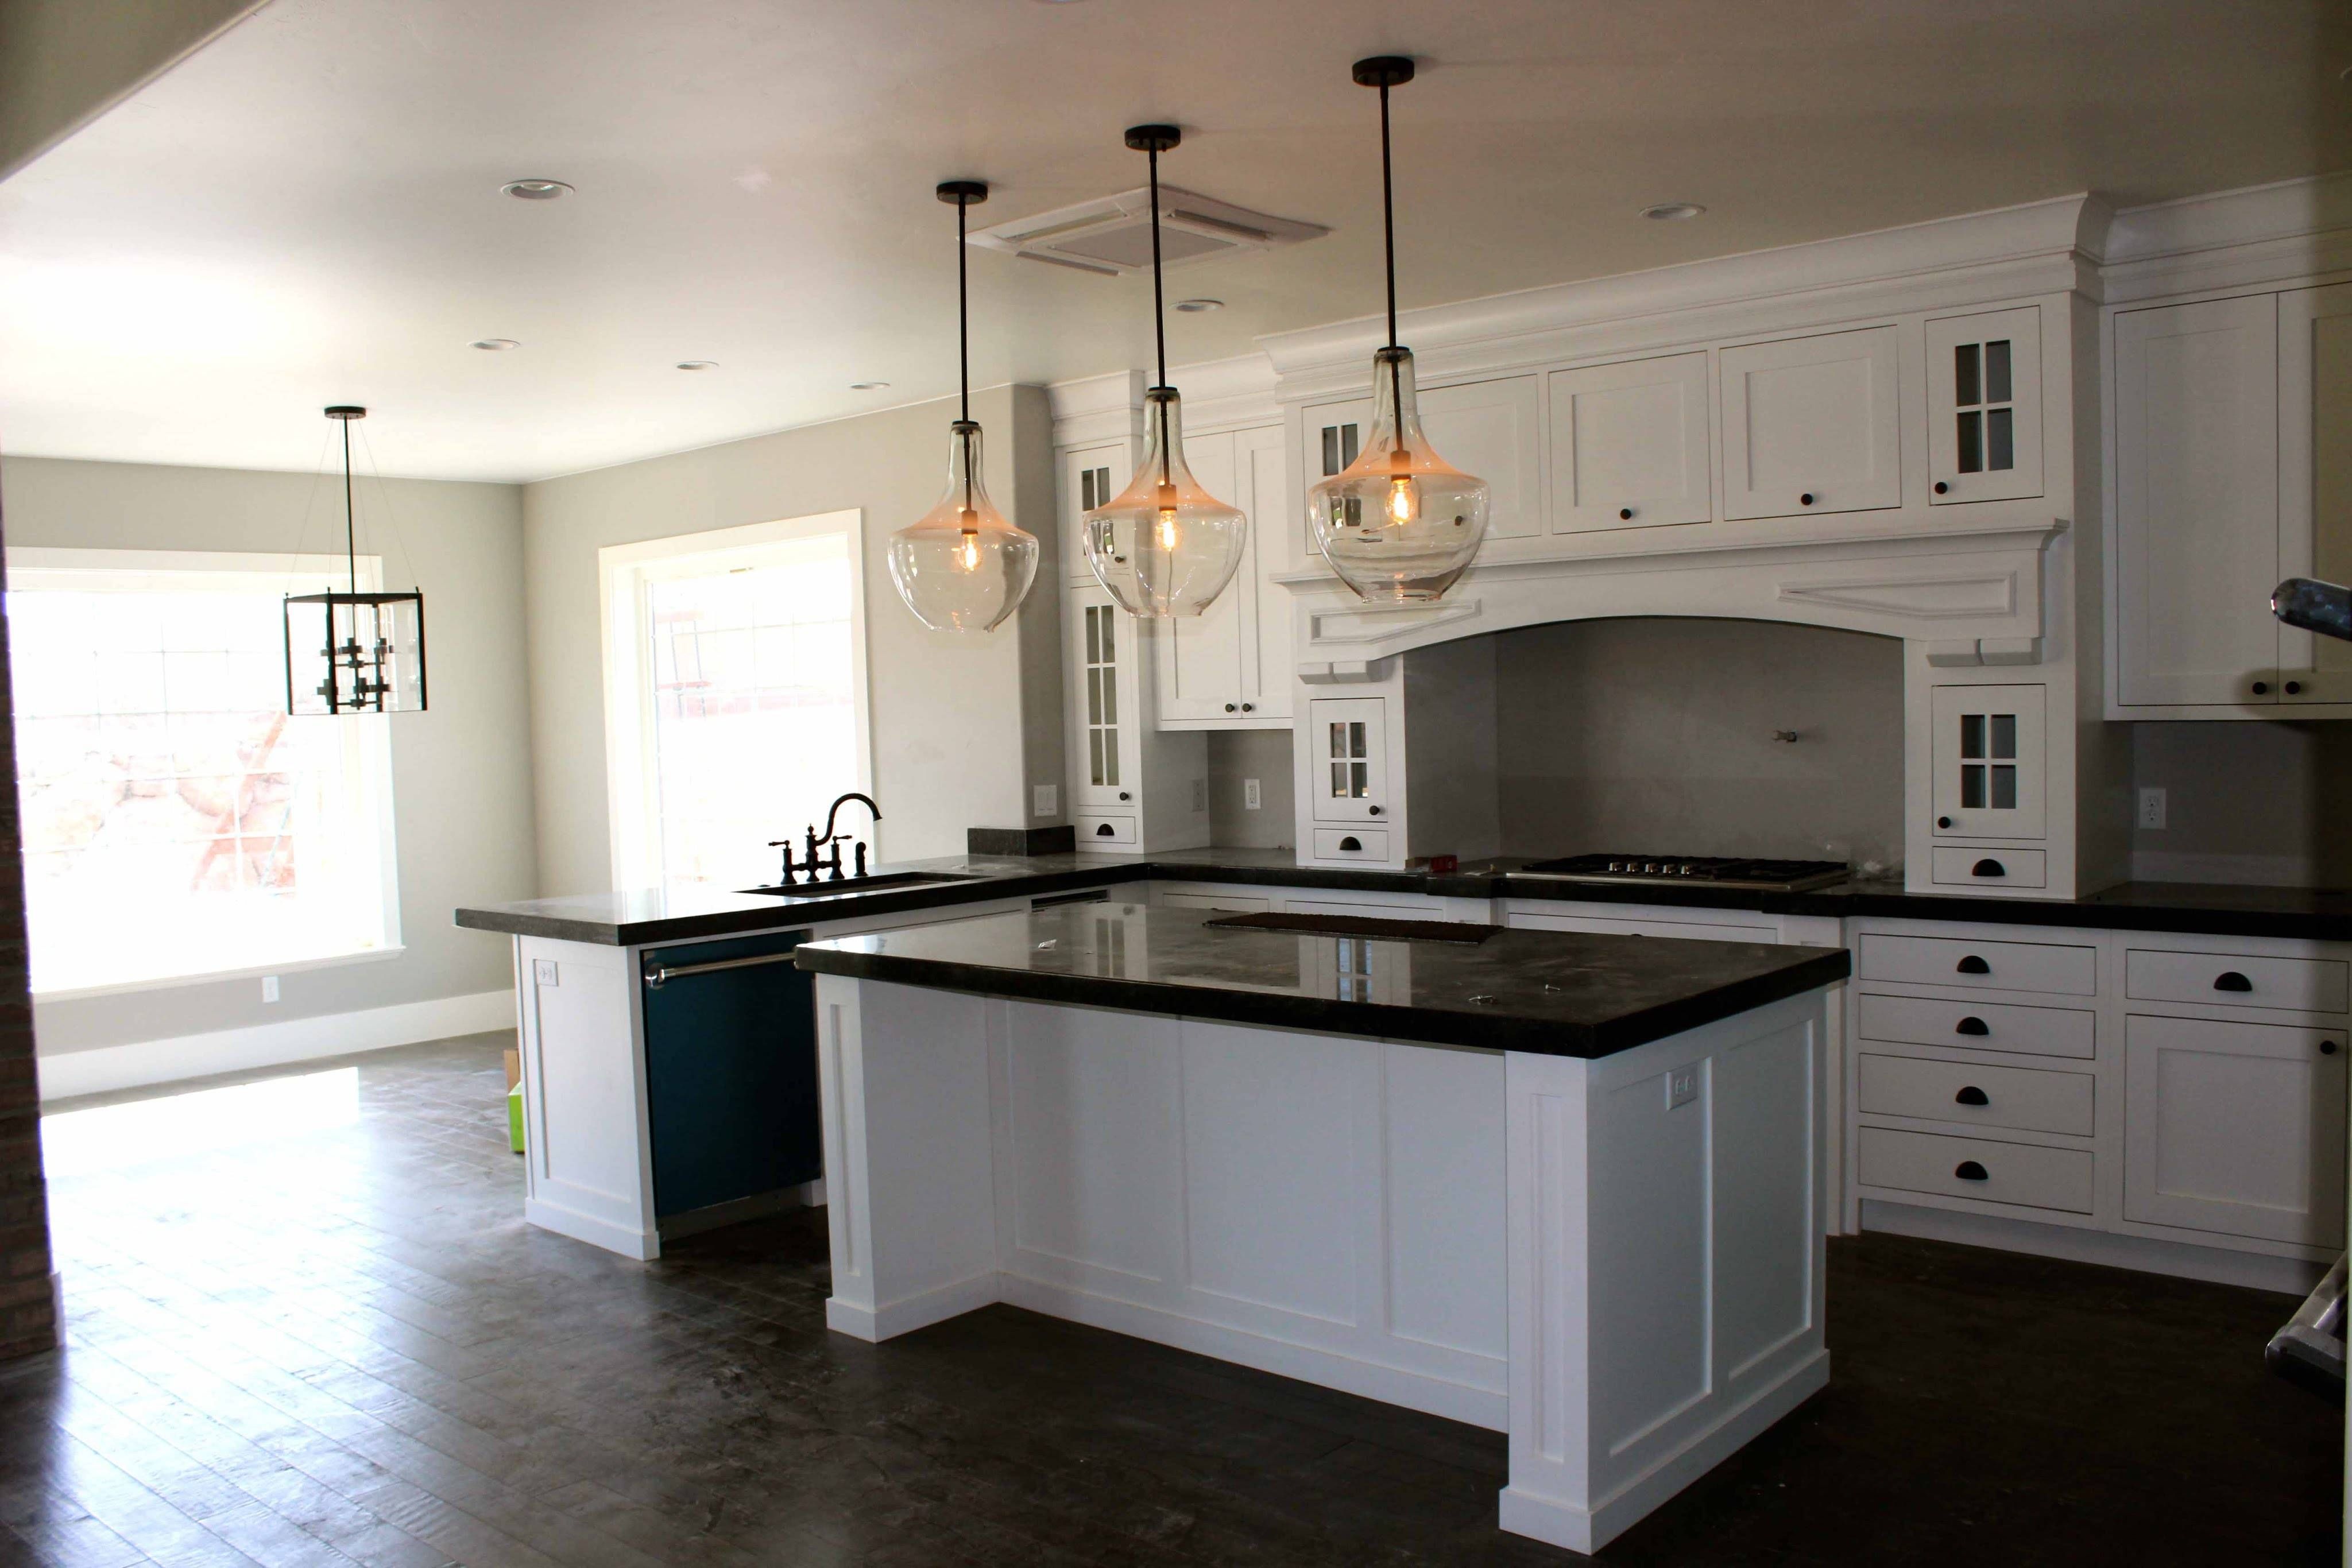 Lovely Pendant Lights Over Kitchen Island 81 For Your Blue Pendant Within Blue Kitchen Pendant Lights (Photo 5 of 15)